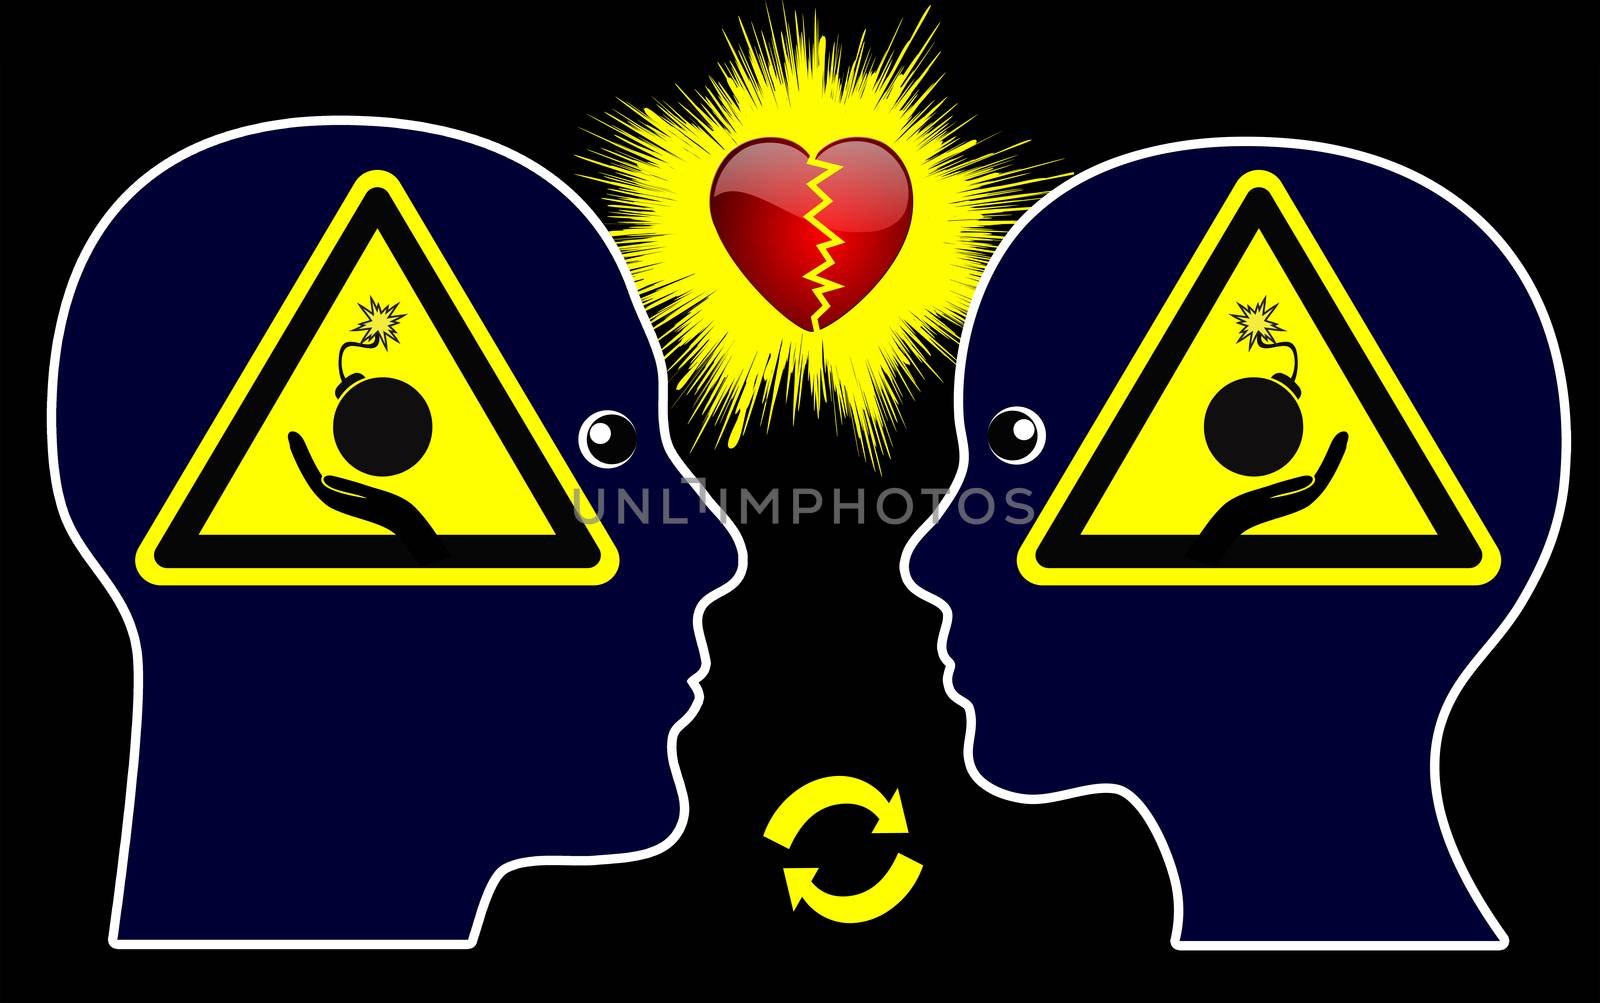 Humorous concept sign of couple fiercely fighting with arguments endangering their love by Bambara